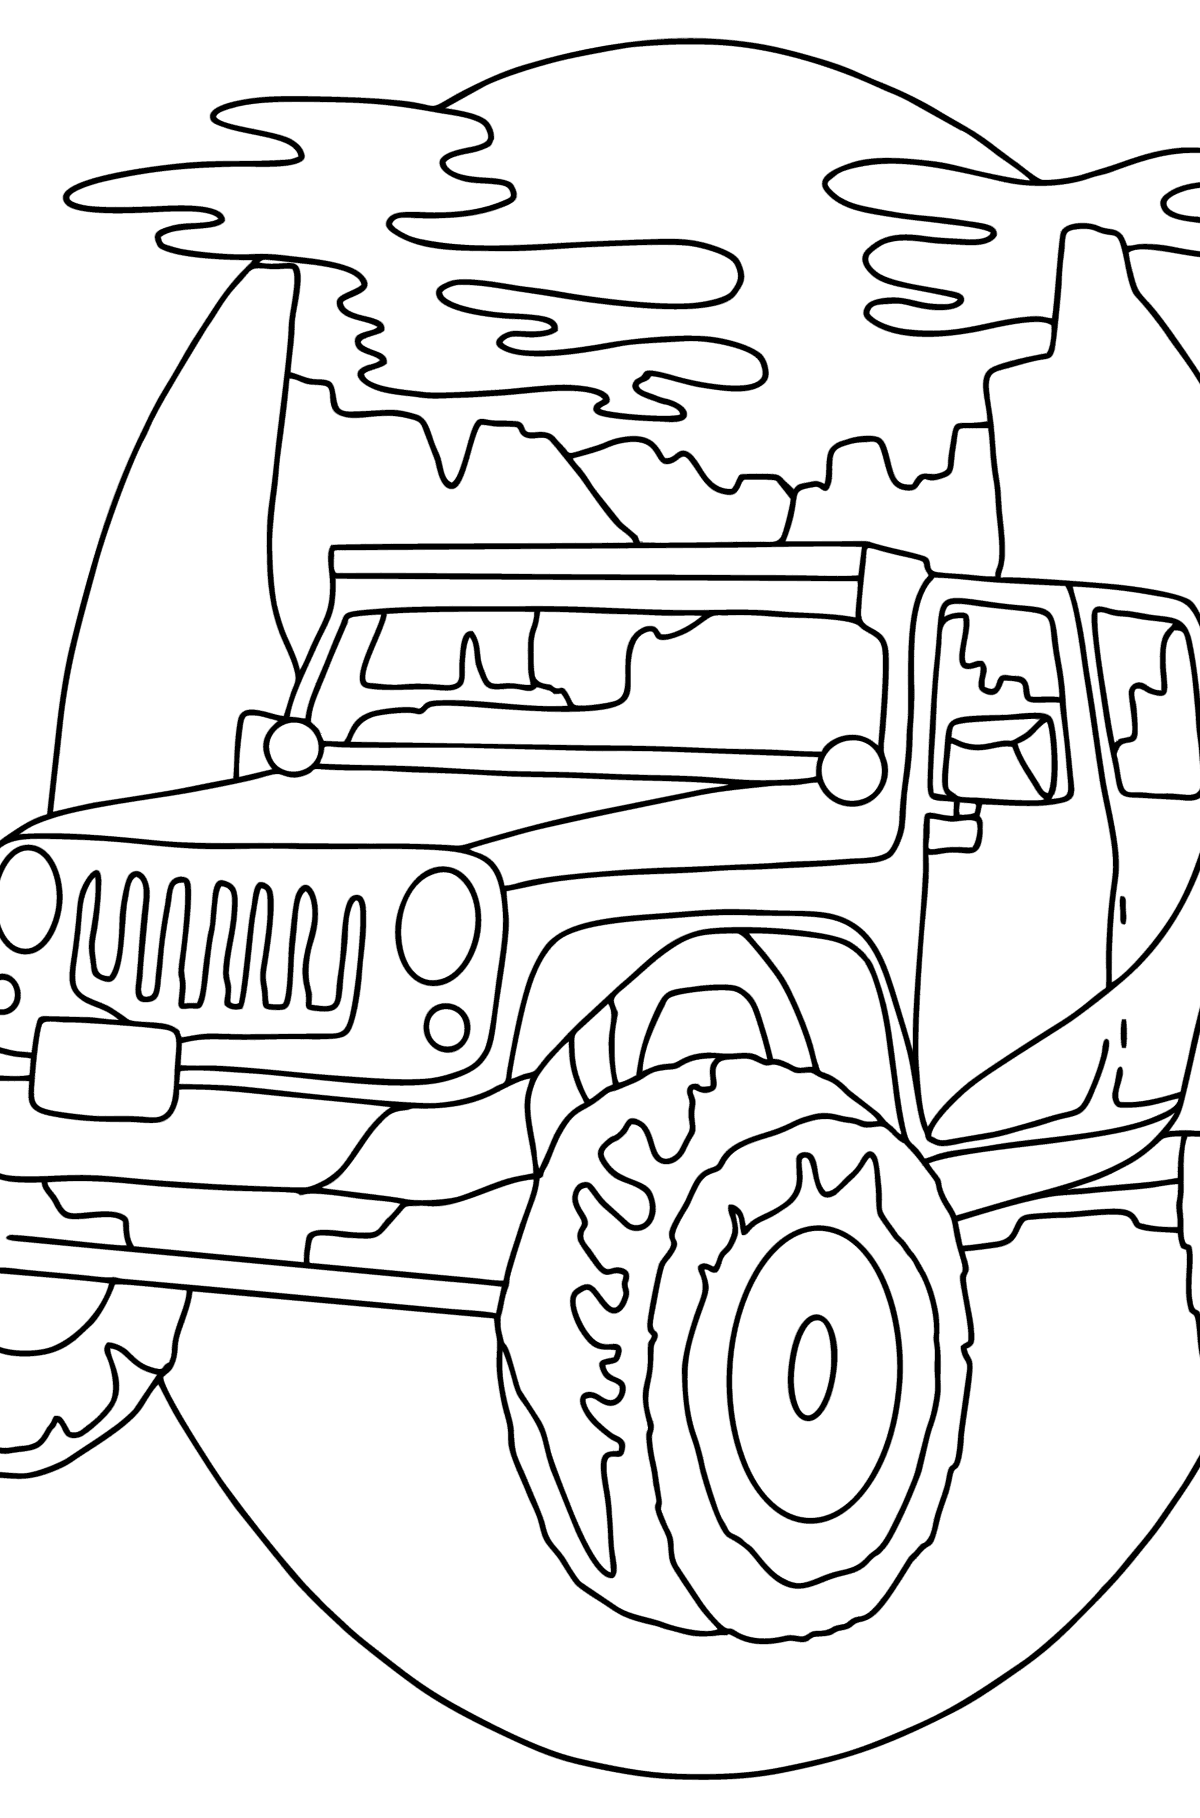 Jeep car   Cars coloring pages for Adults online and printable